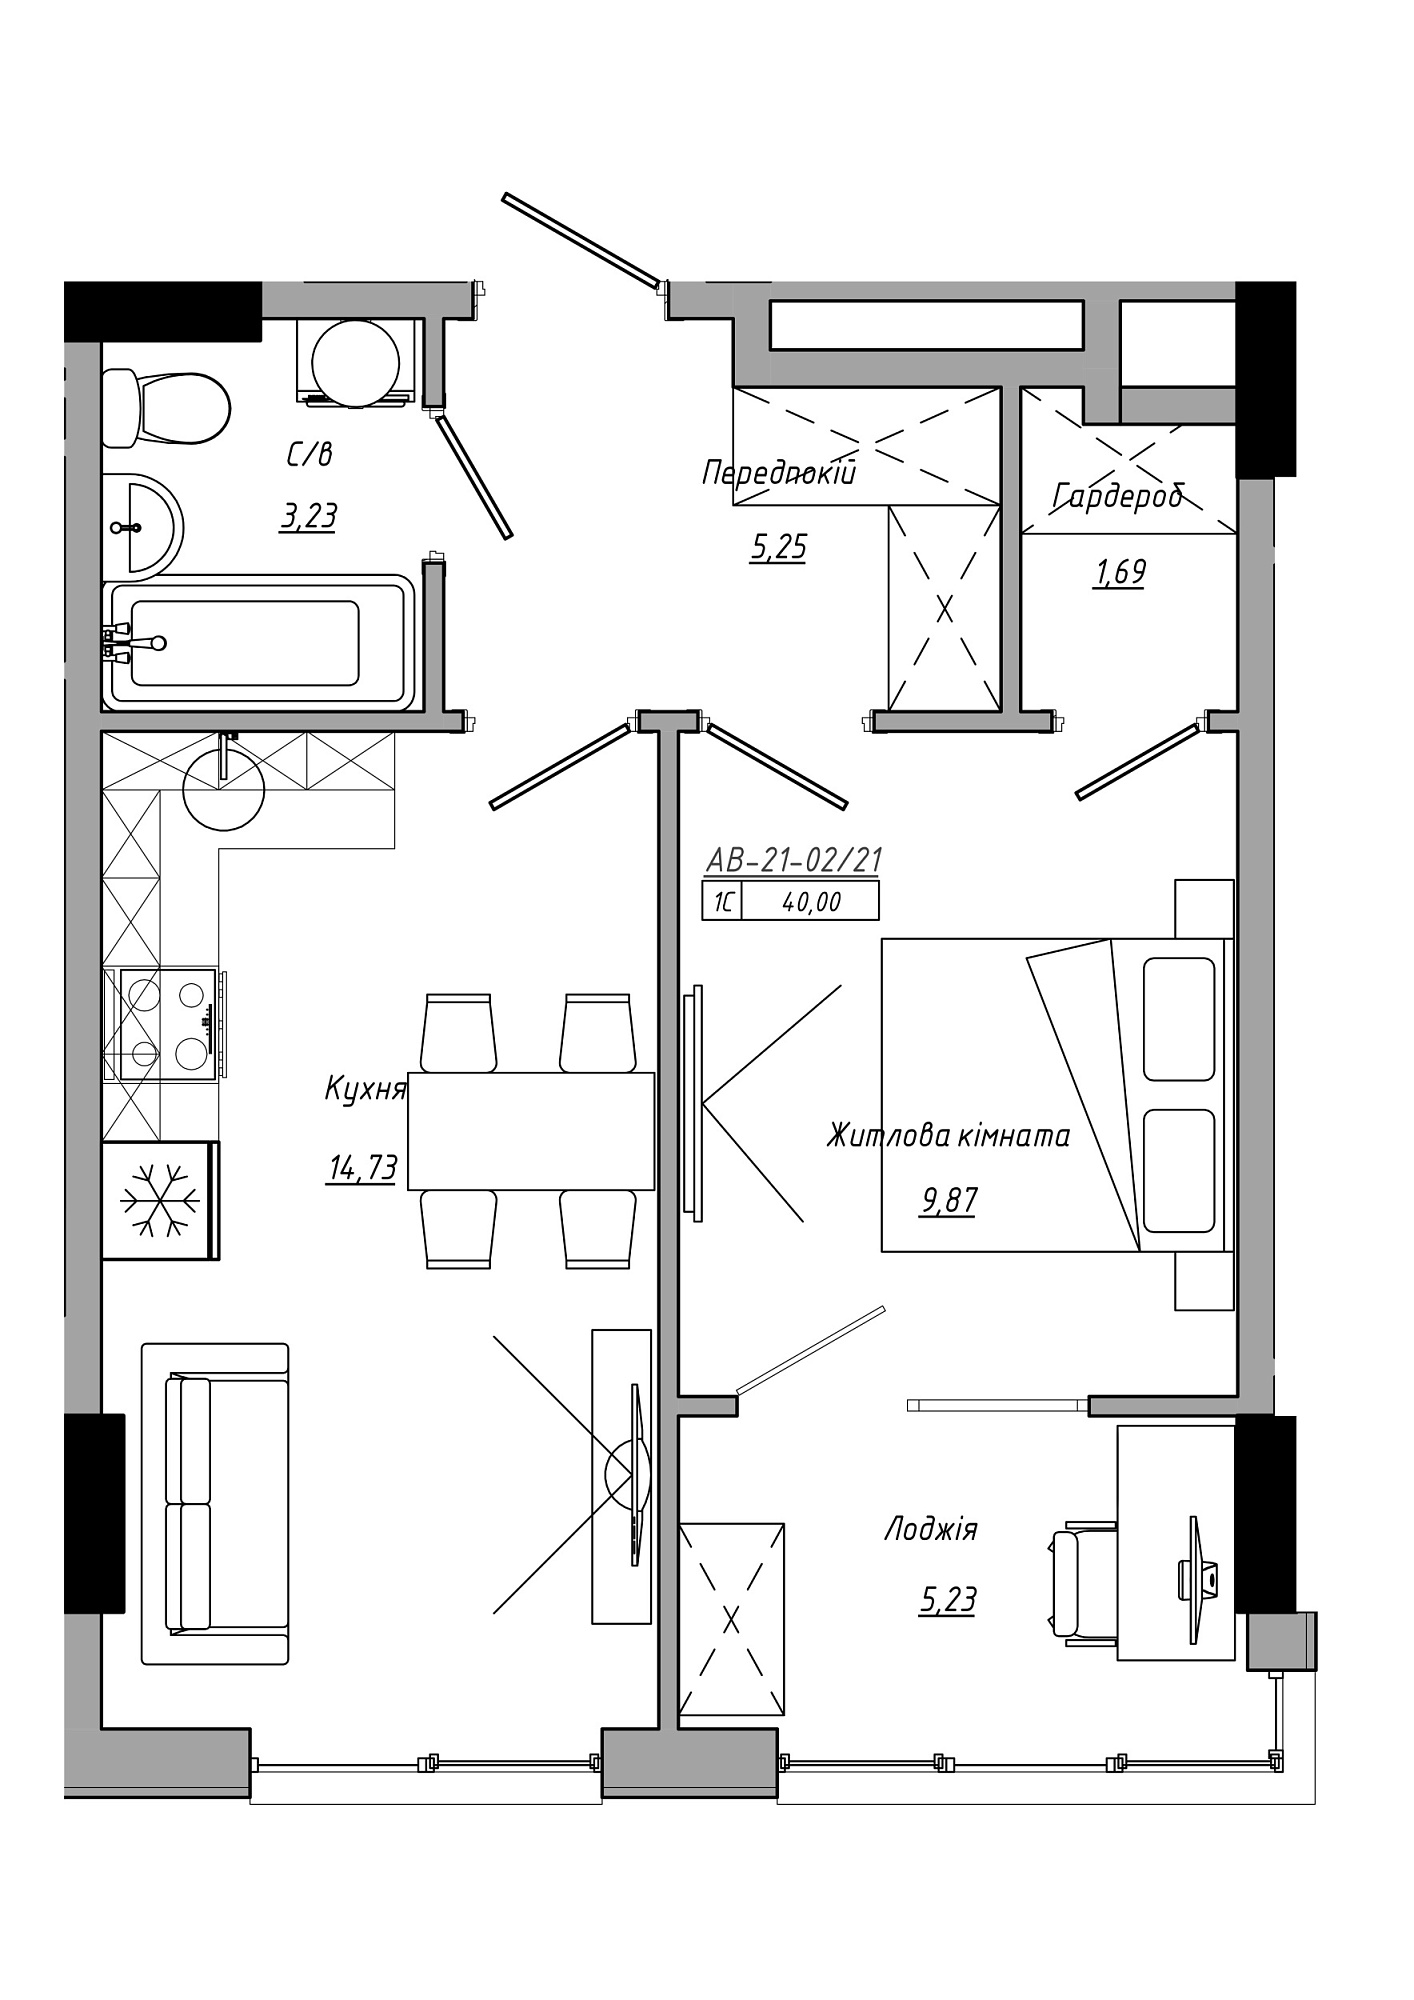 Planning 1-rm flats area 40m2, AB-21-02/00021.